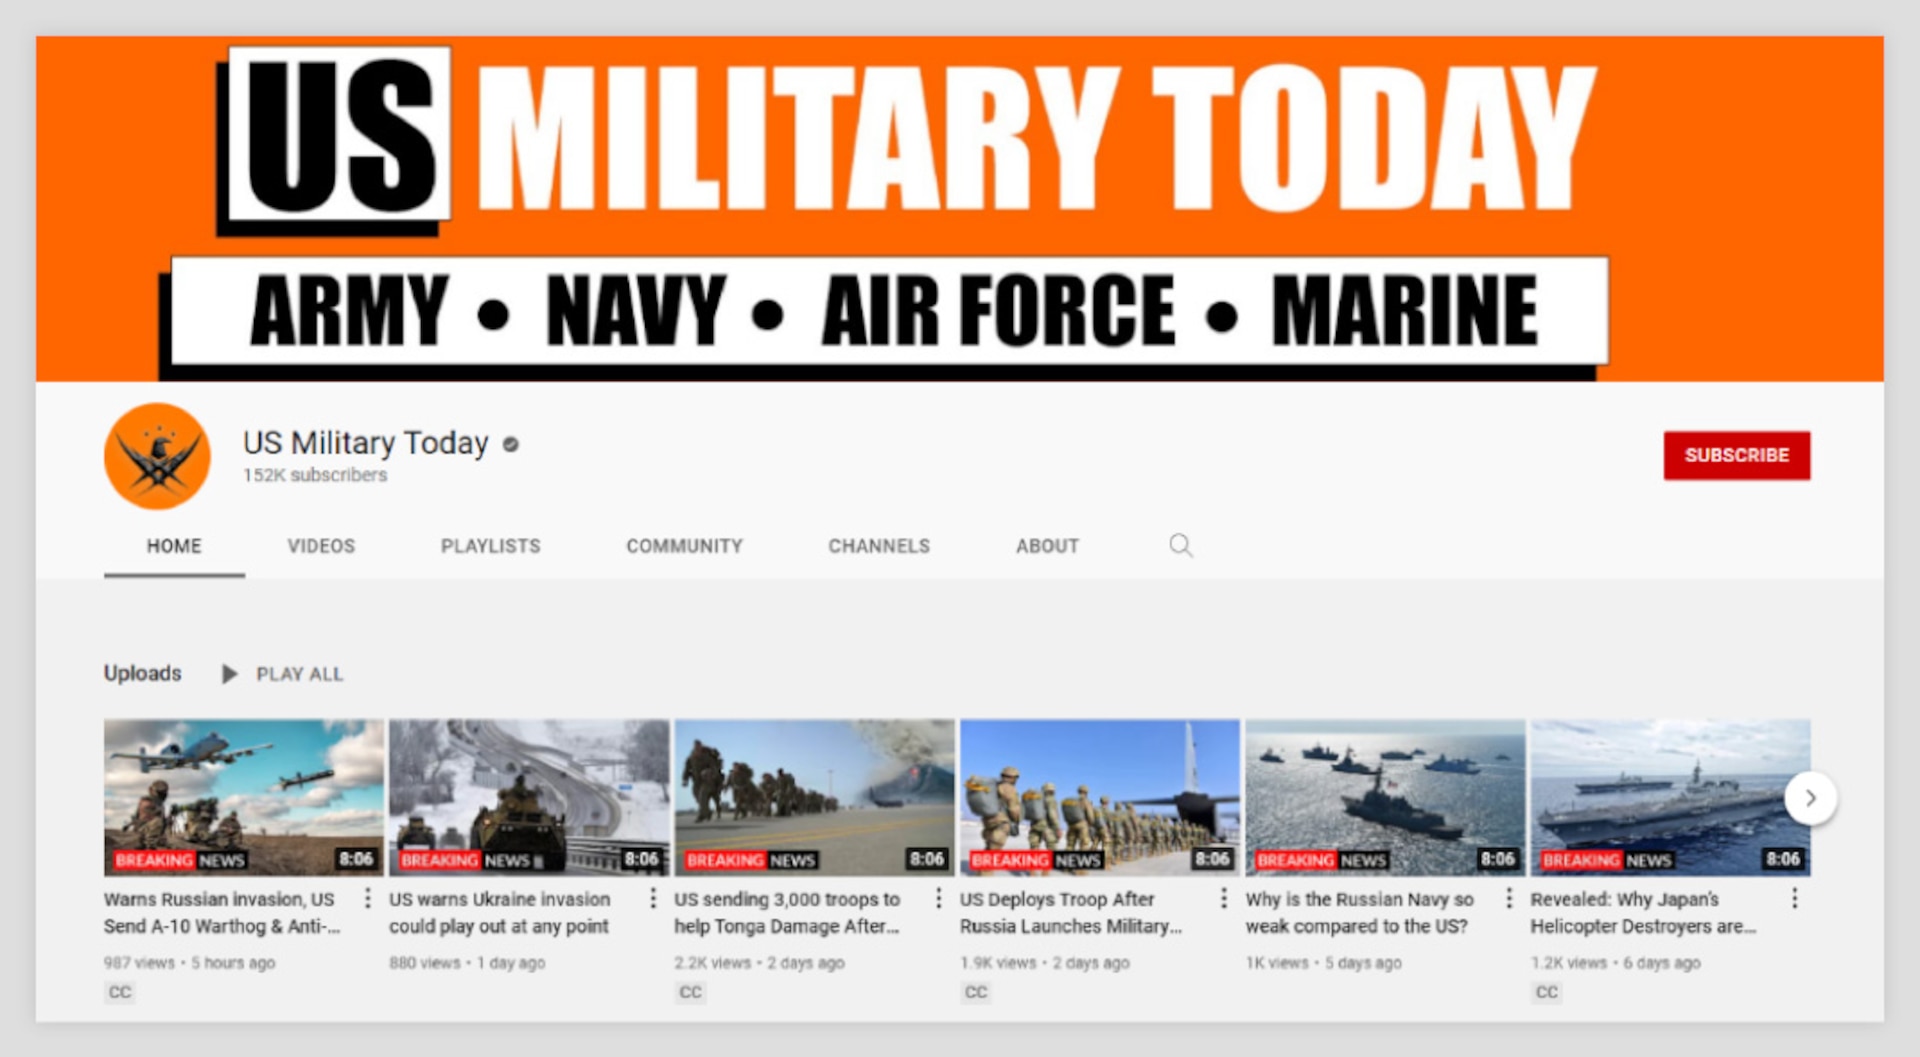 Screenshot of a YouTube channel titled "US Military Today" with a subheading that reads, " Army, Navy, Air Force, Marine." The channel contains several uploaded videos and shorts.